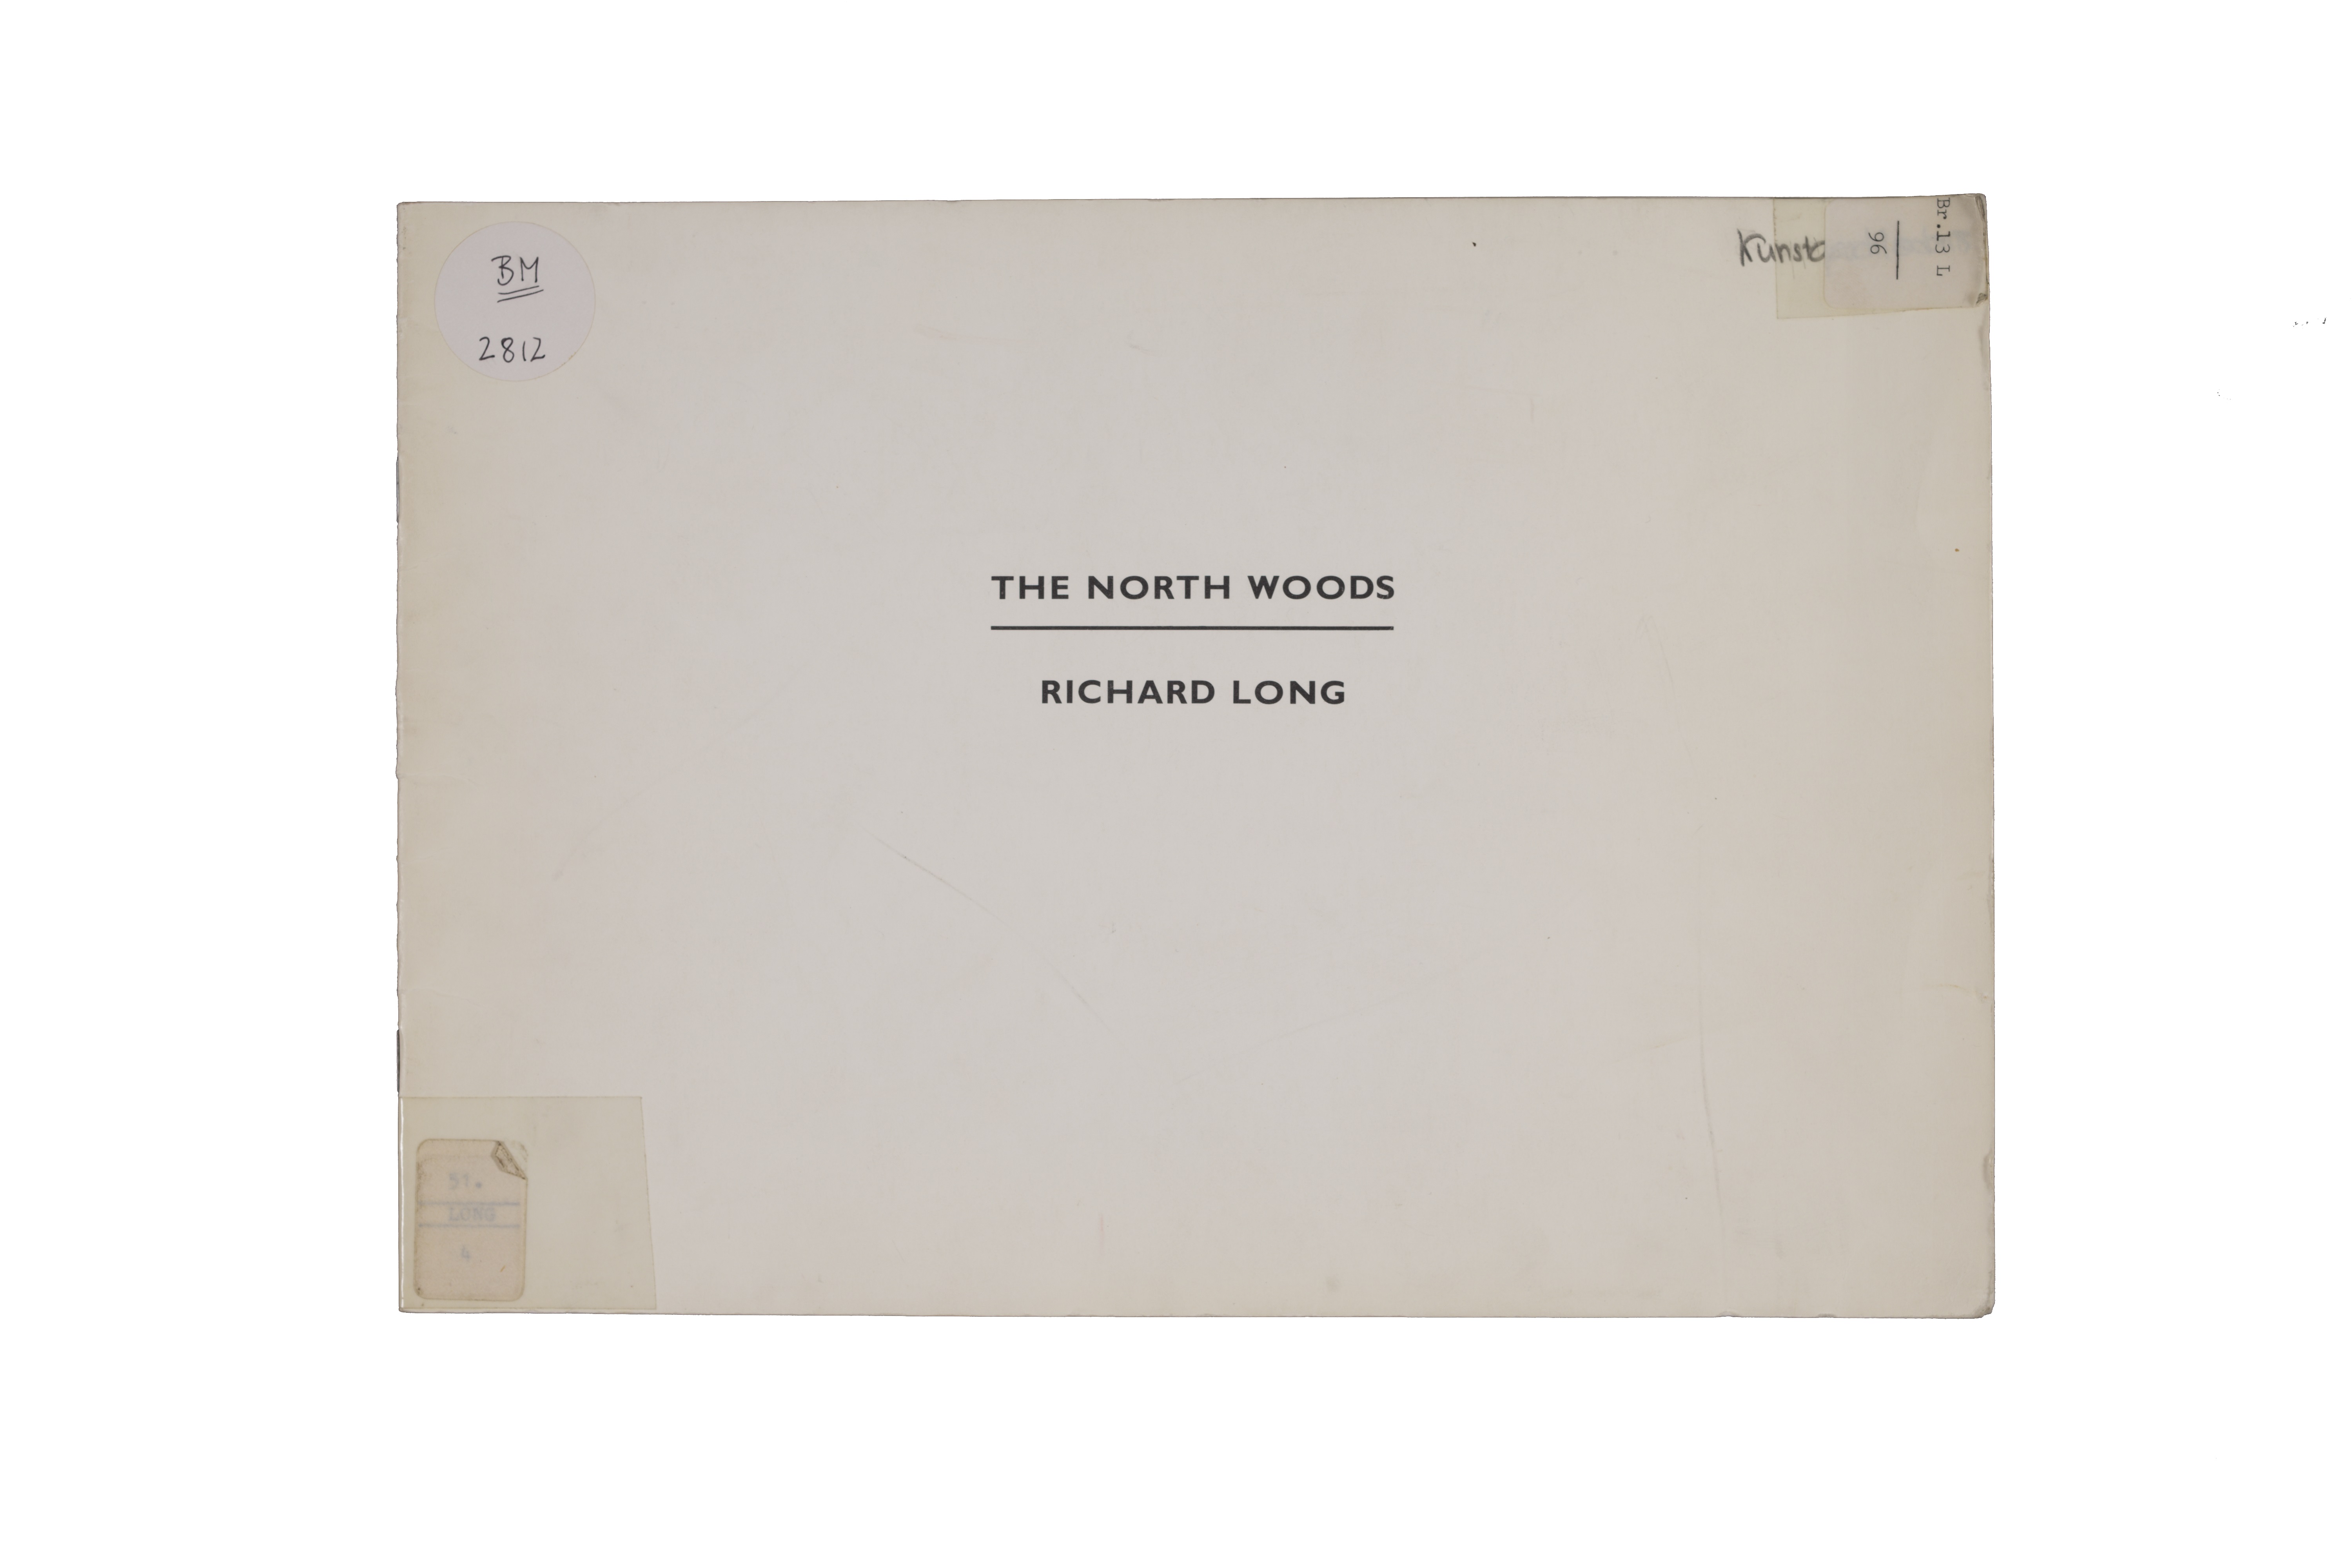 Richard Long: North Woods, 1977 (omslag)Richard Long: The north woods, 1977 (cover)